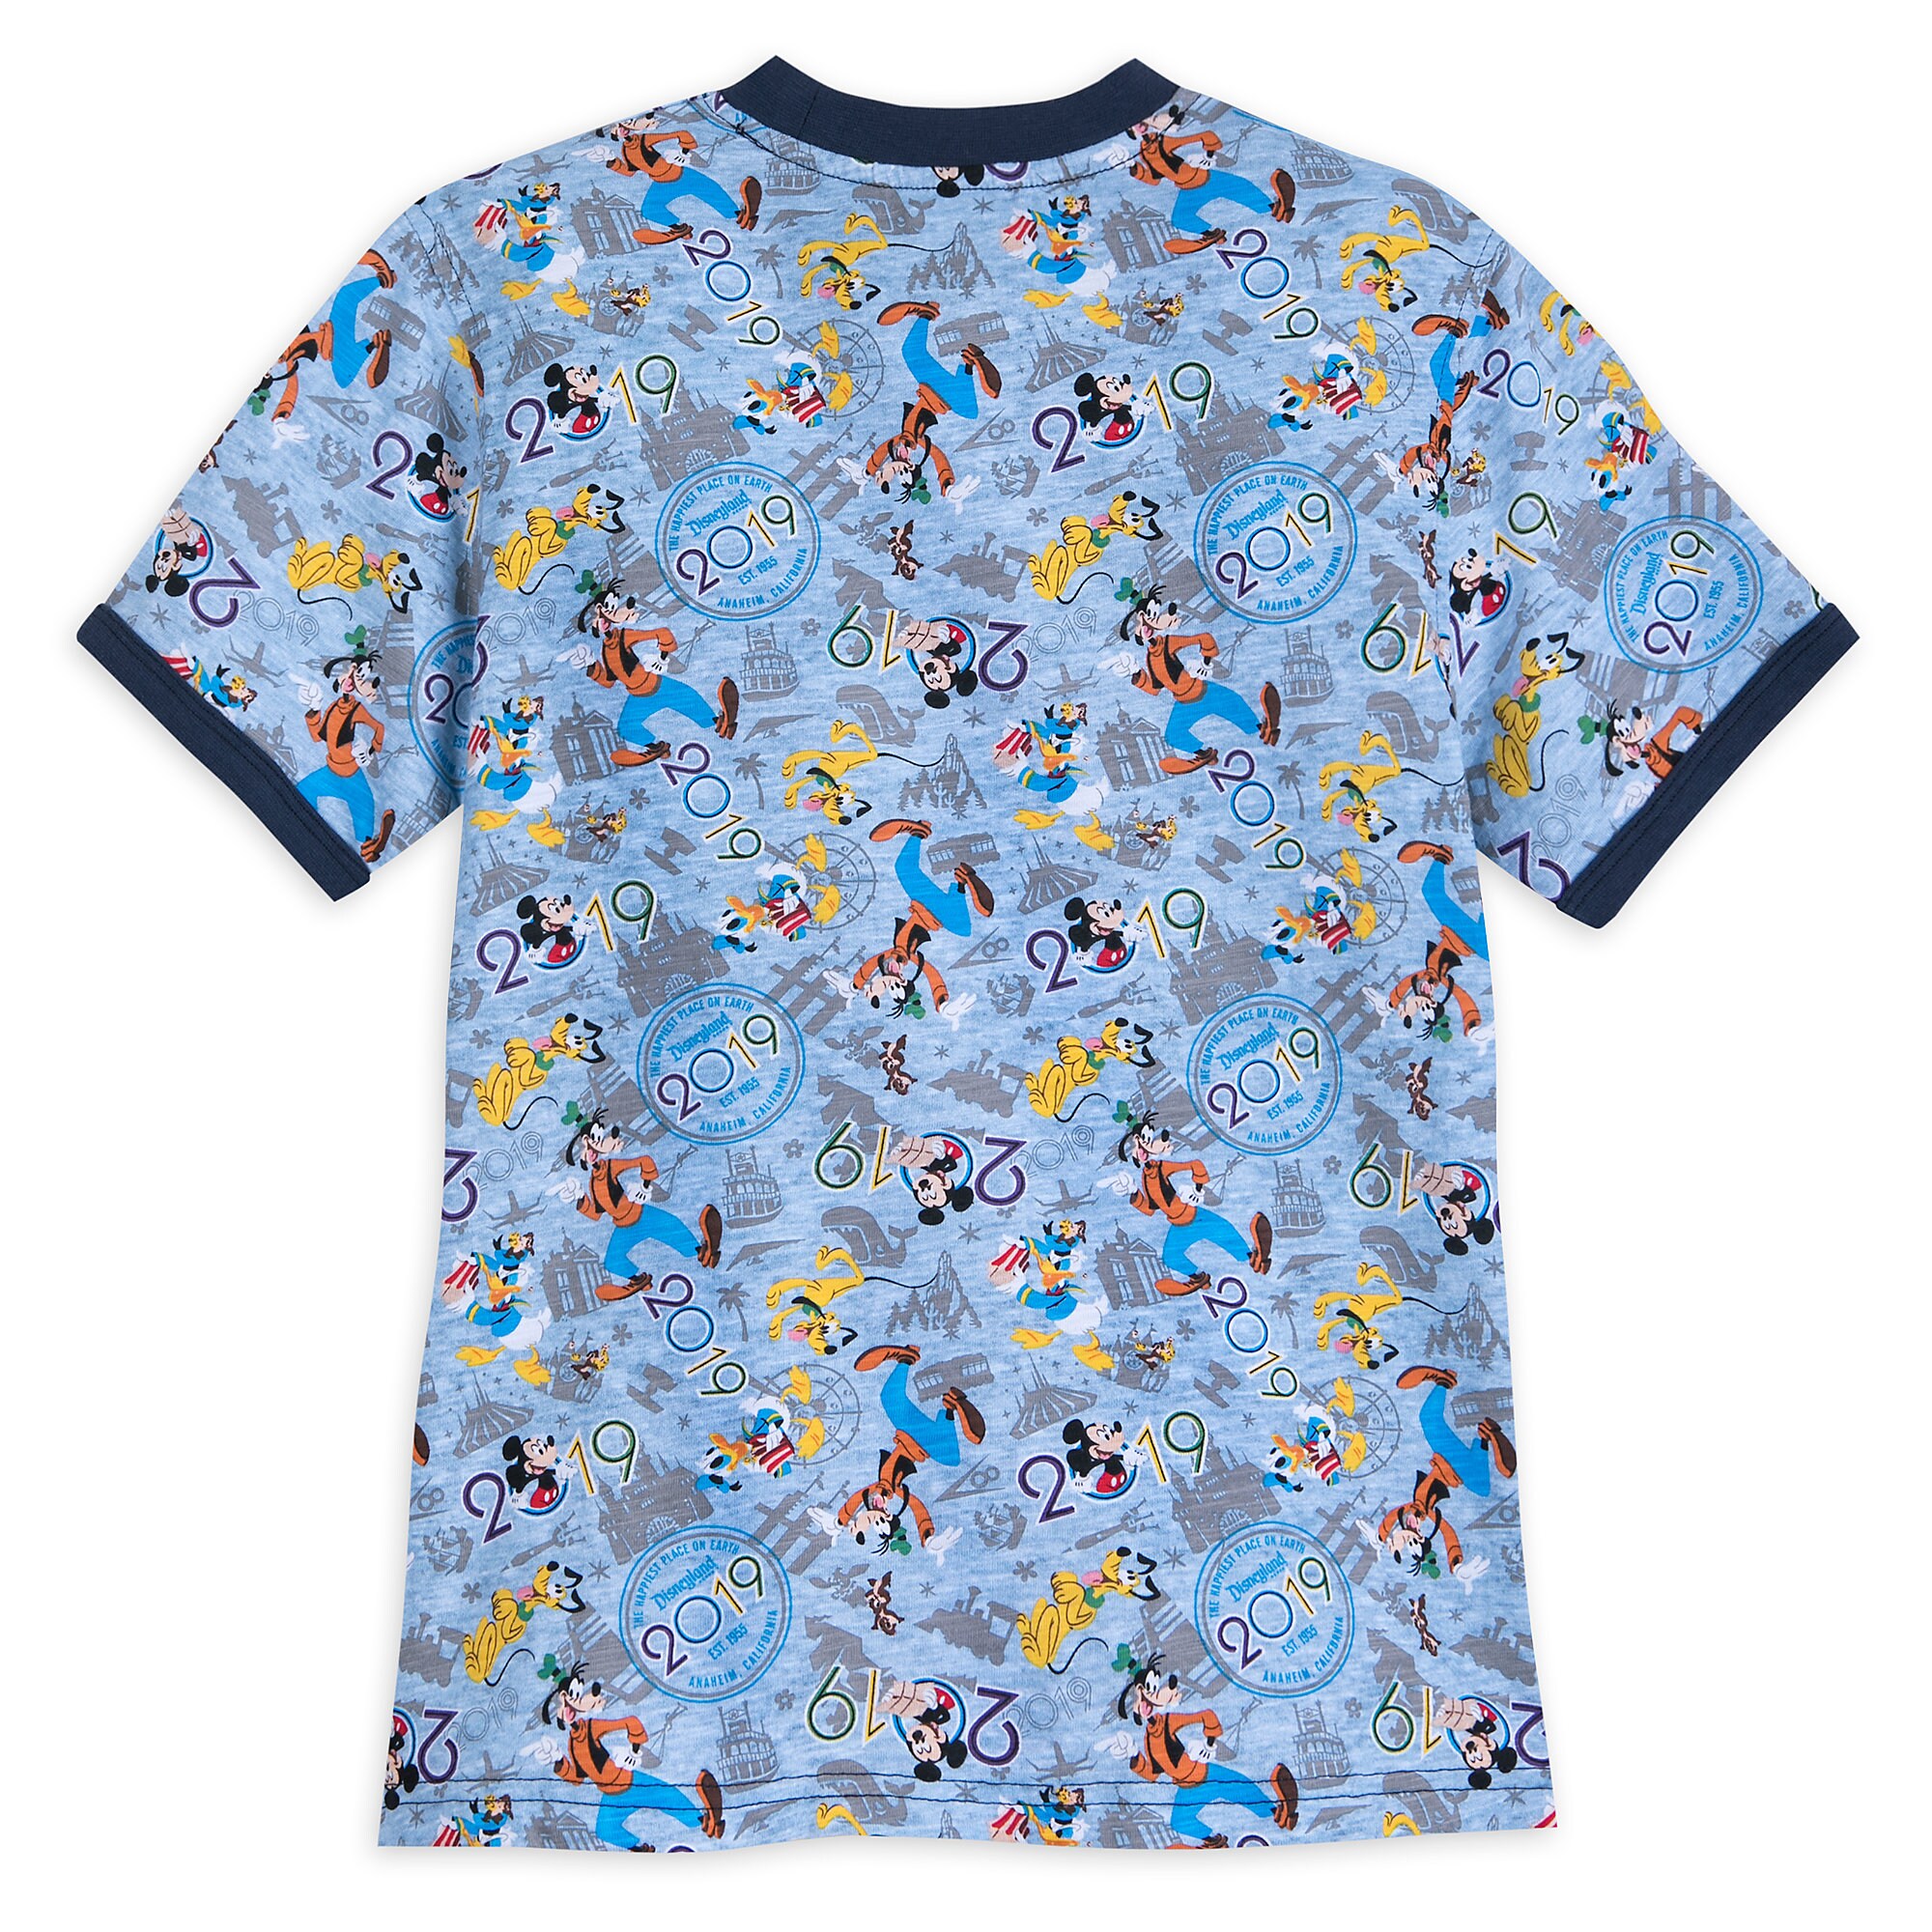 Mickey Mouse and Friends Ringer T-Shirt for Kids - Disneyland 2019